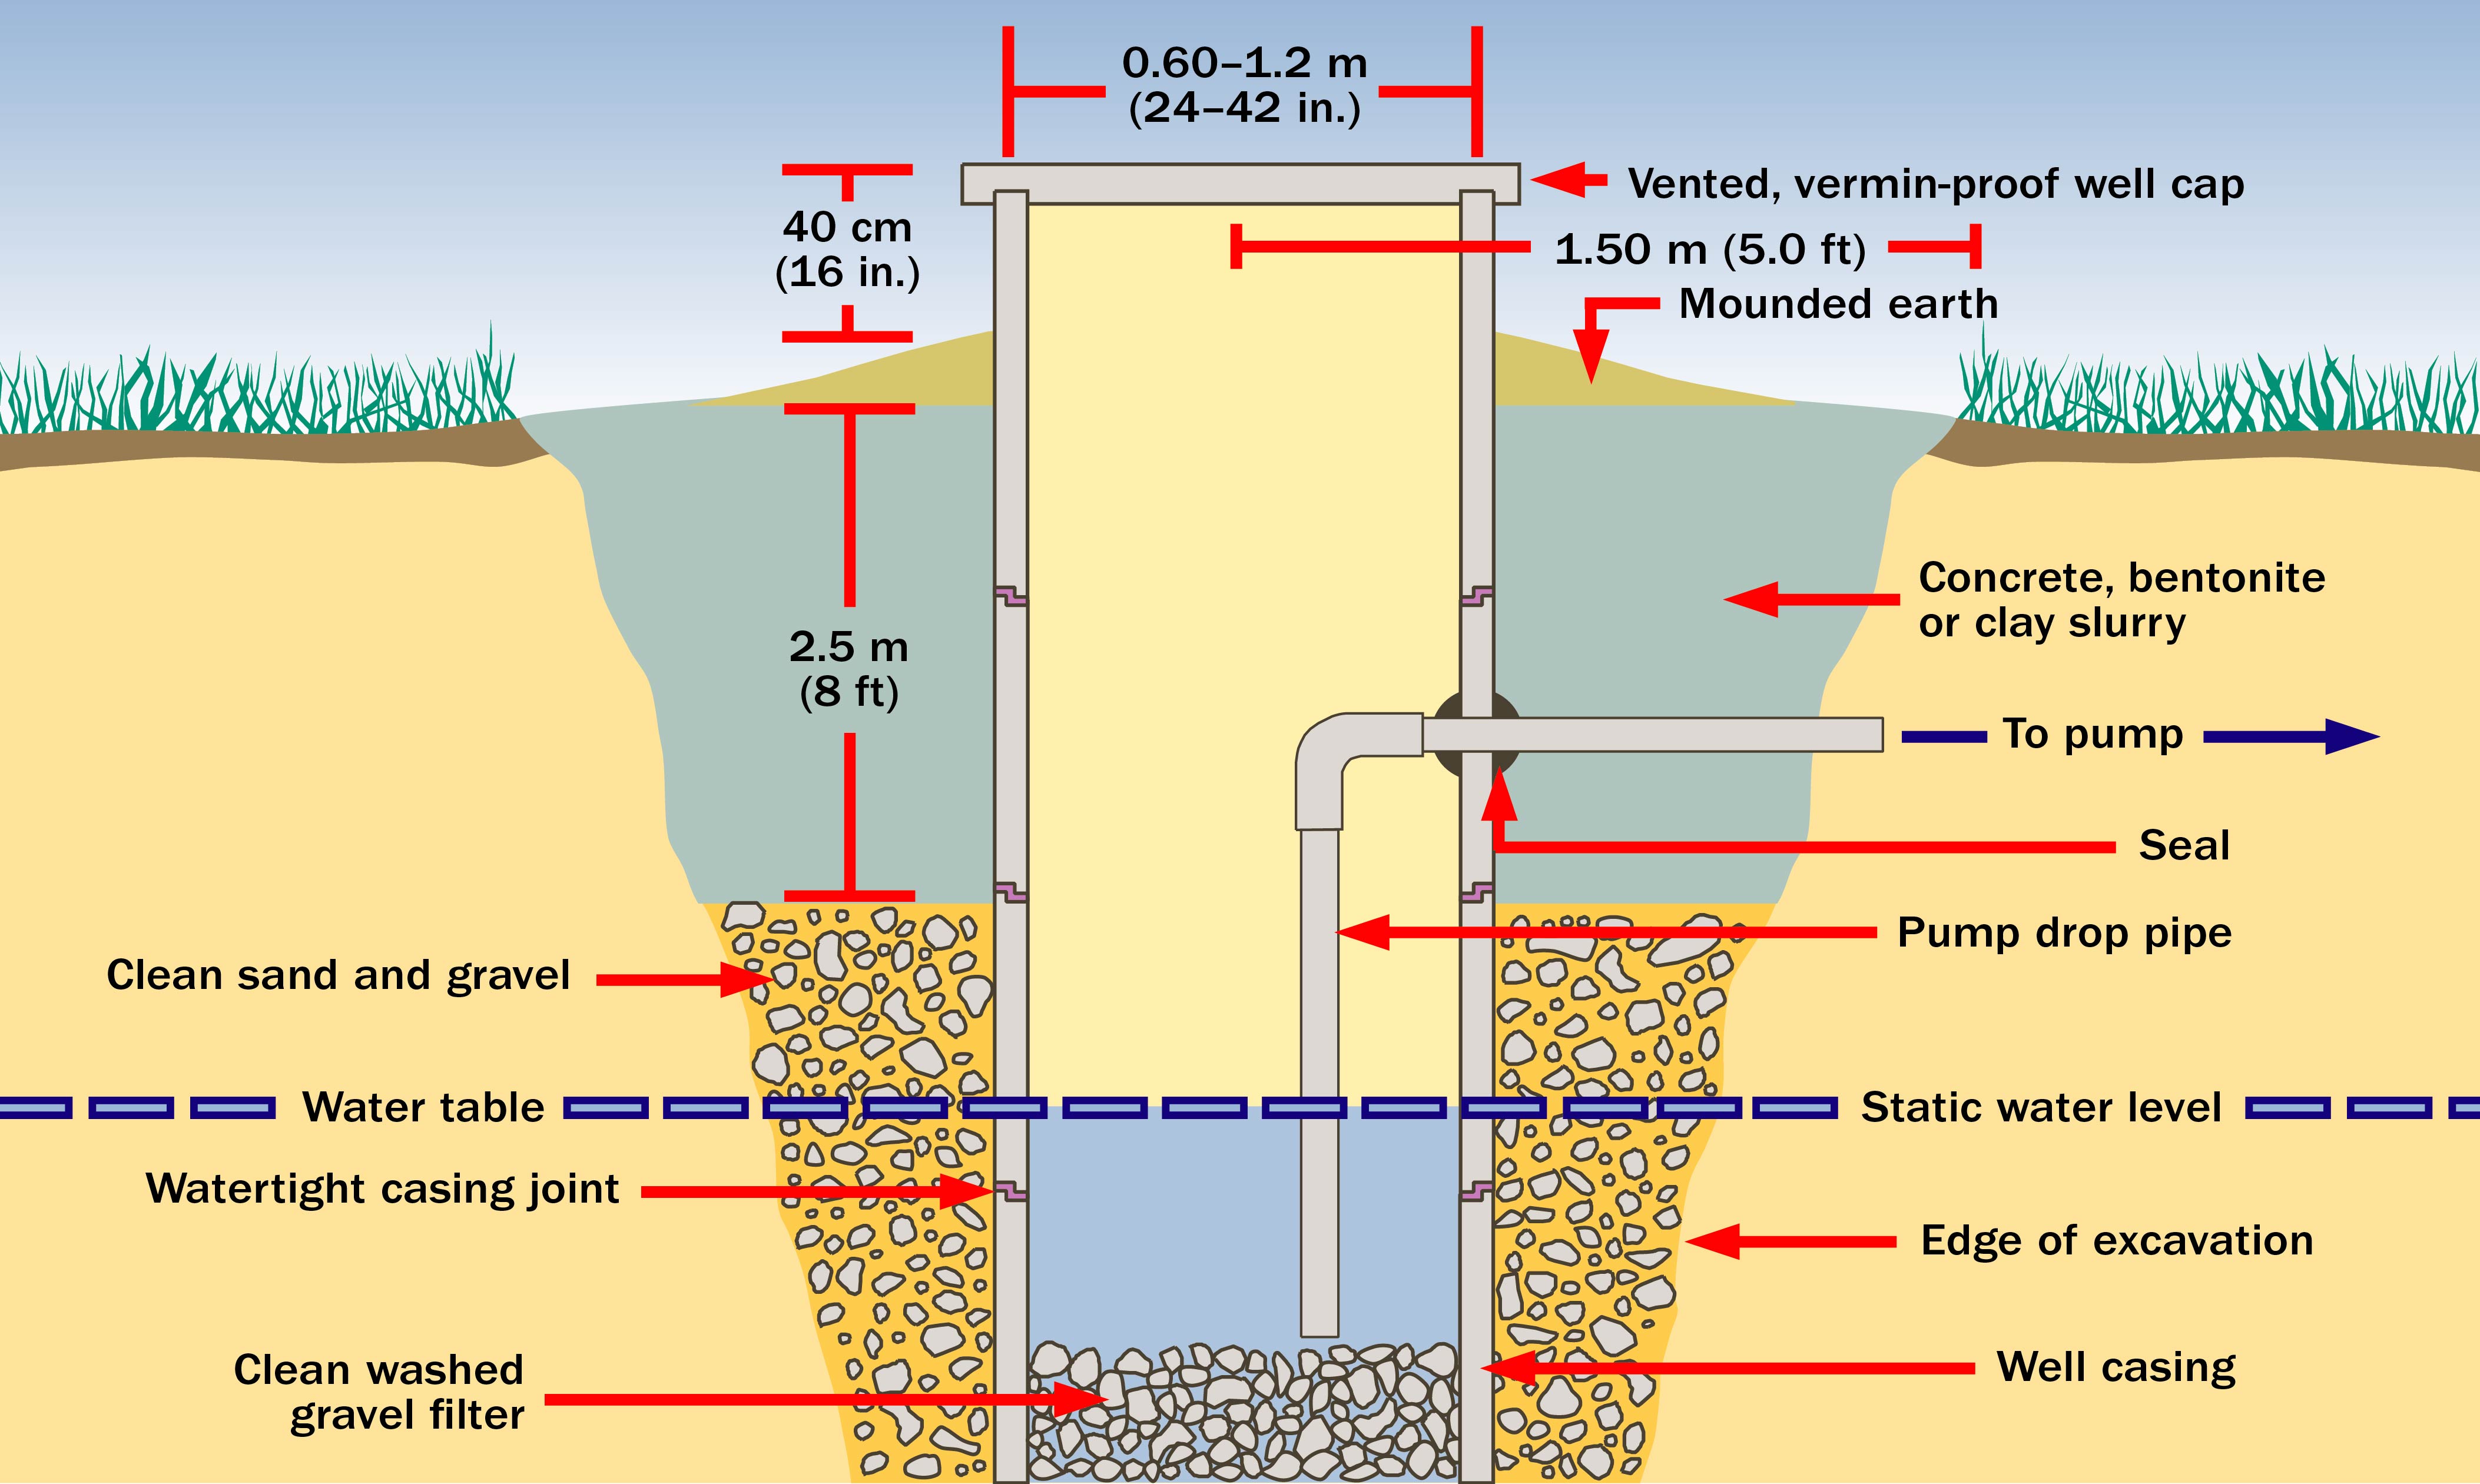 Figure 4. Diagram showing subsurface view of properly constructed large-diameter well in a sand or gravel aquifer. The well has a pump drop pipe, the static water level rises inside the well casing, surrounded by an annular seal made of cement grout, concrete, bentonite or clay slurry.